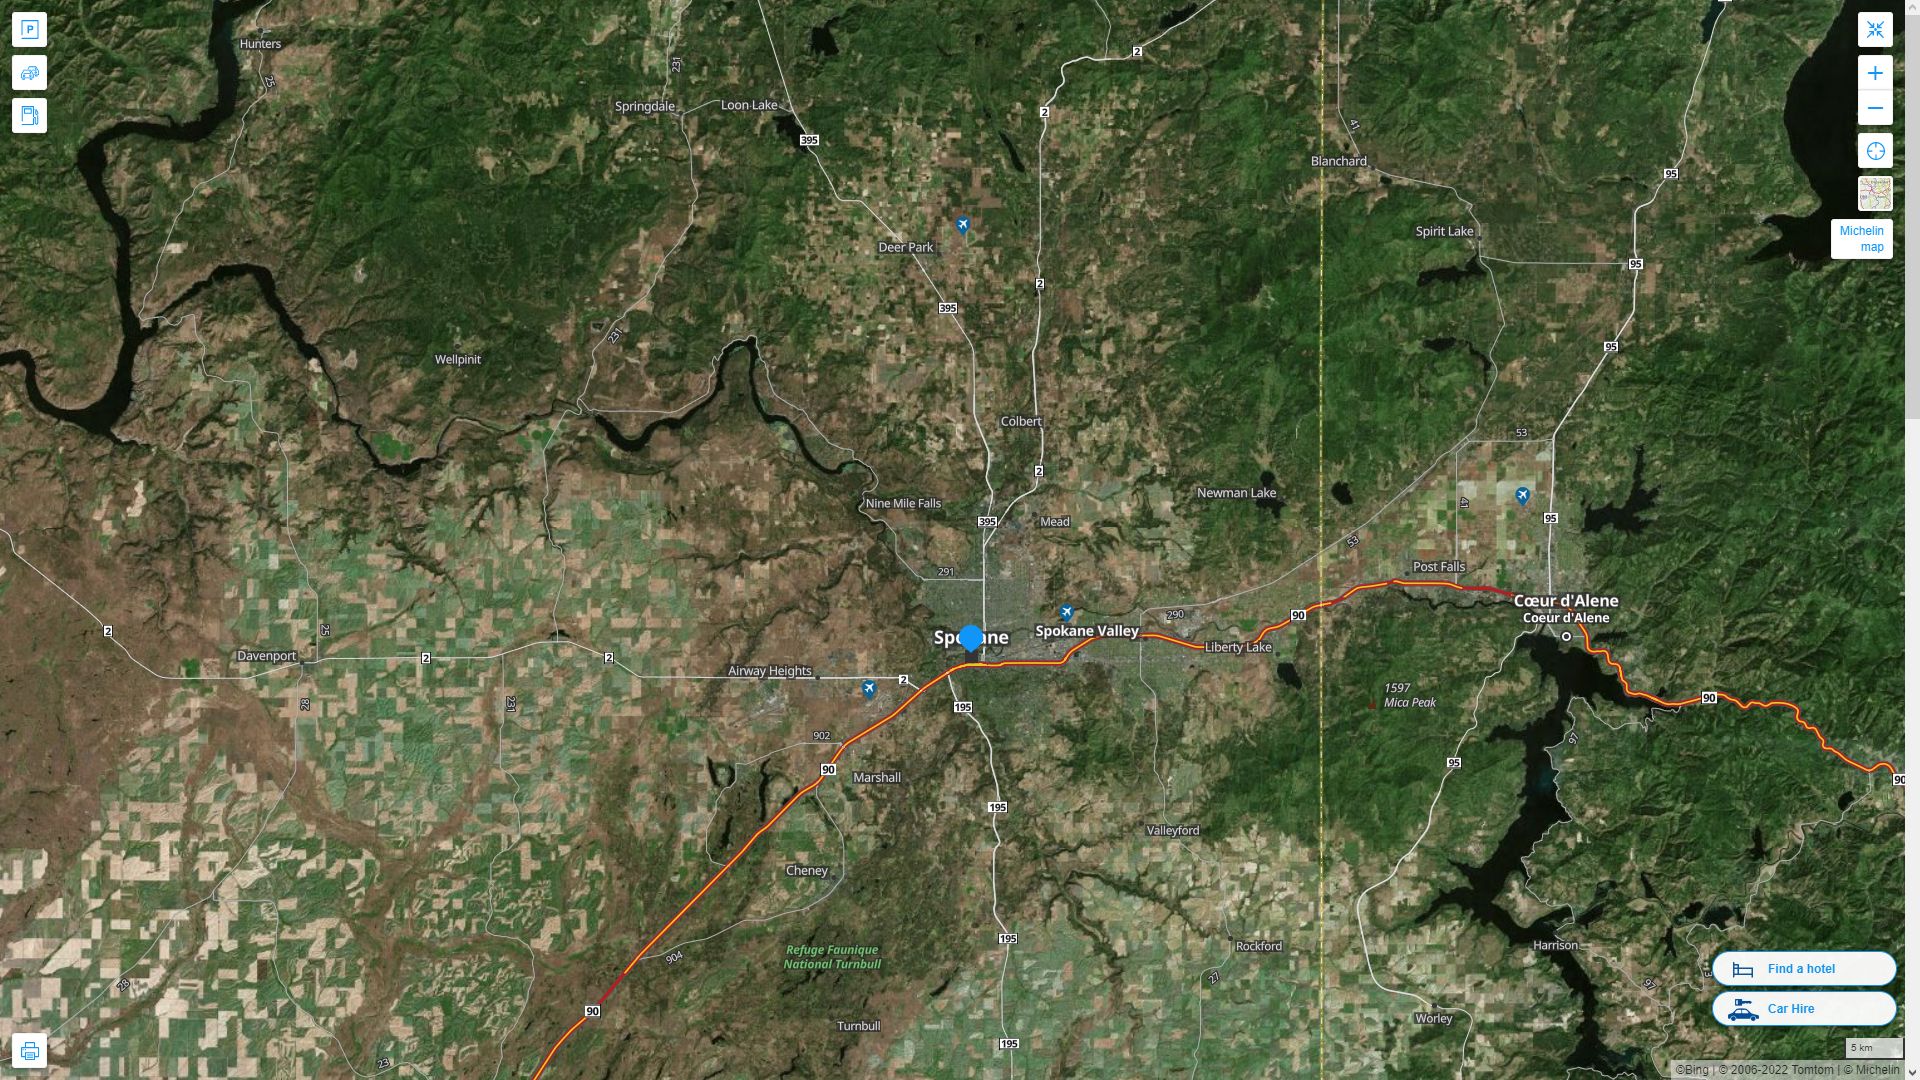 Spokane Washington Highway and Road Map with Satellite View